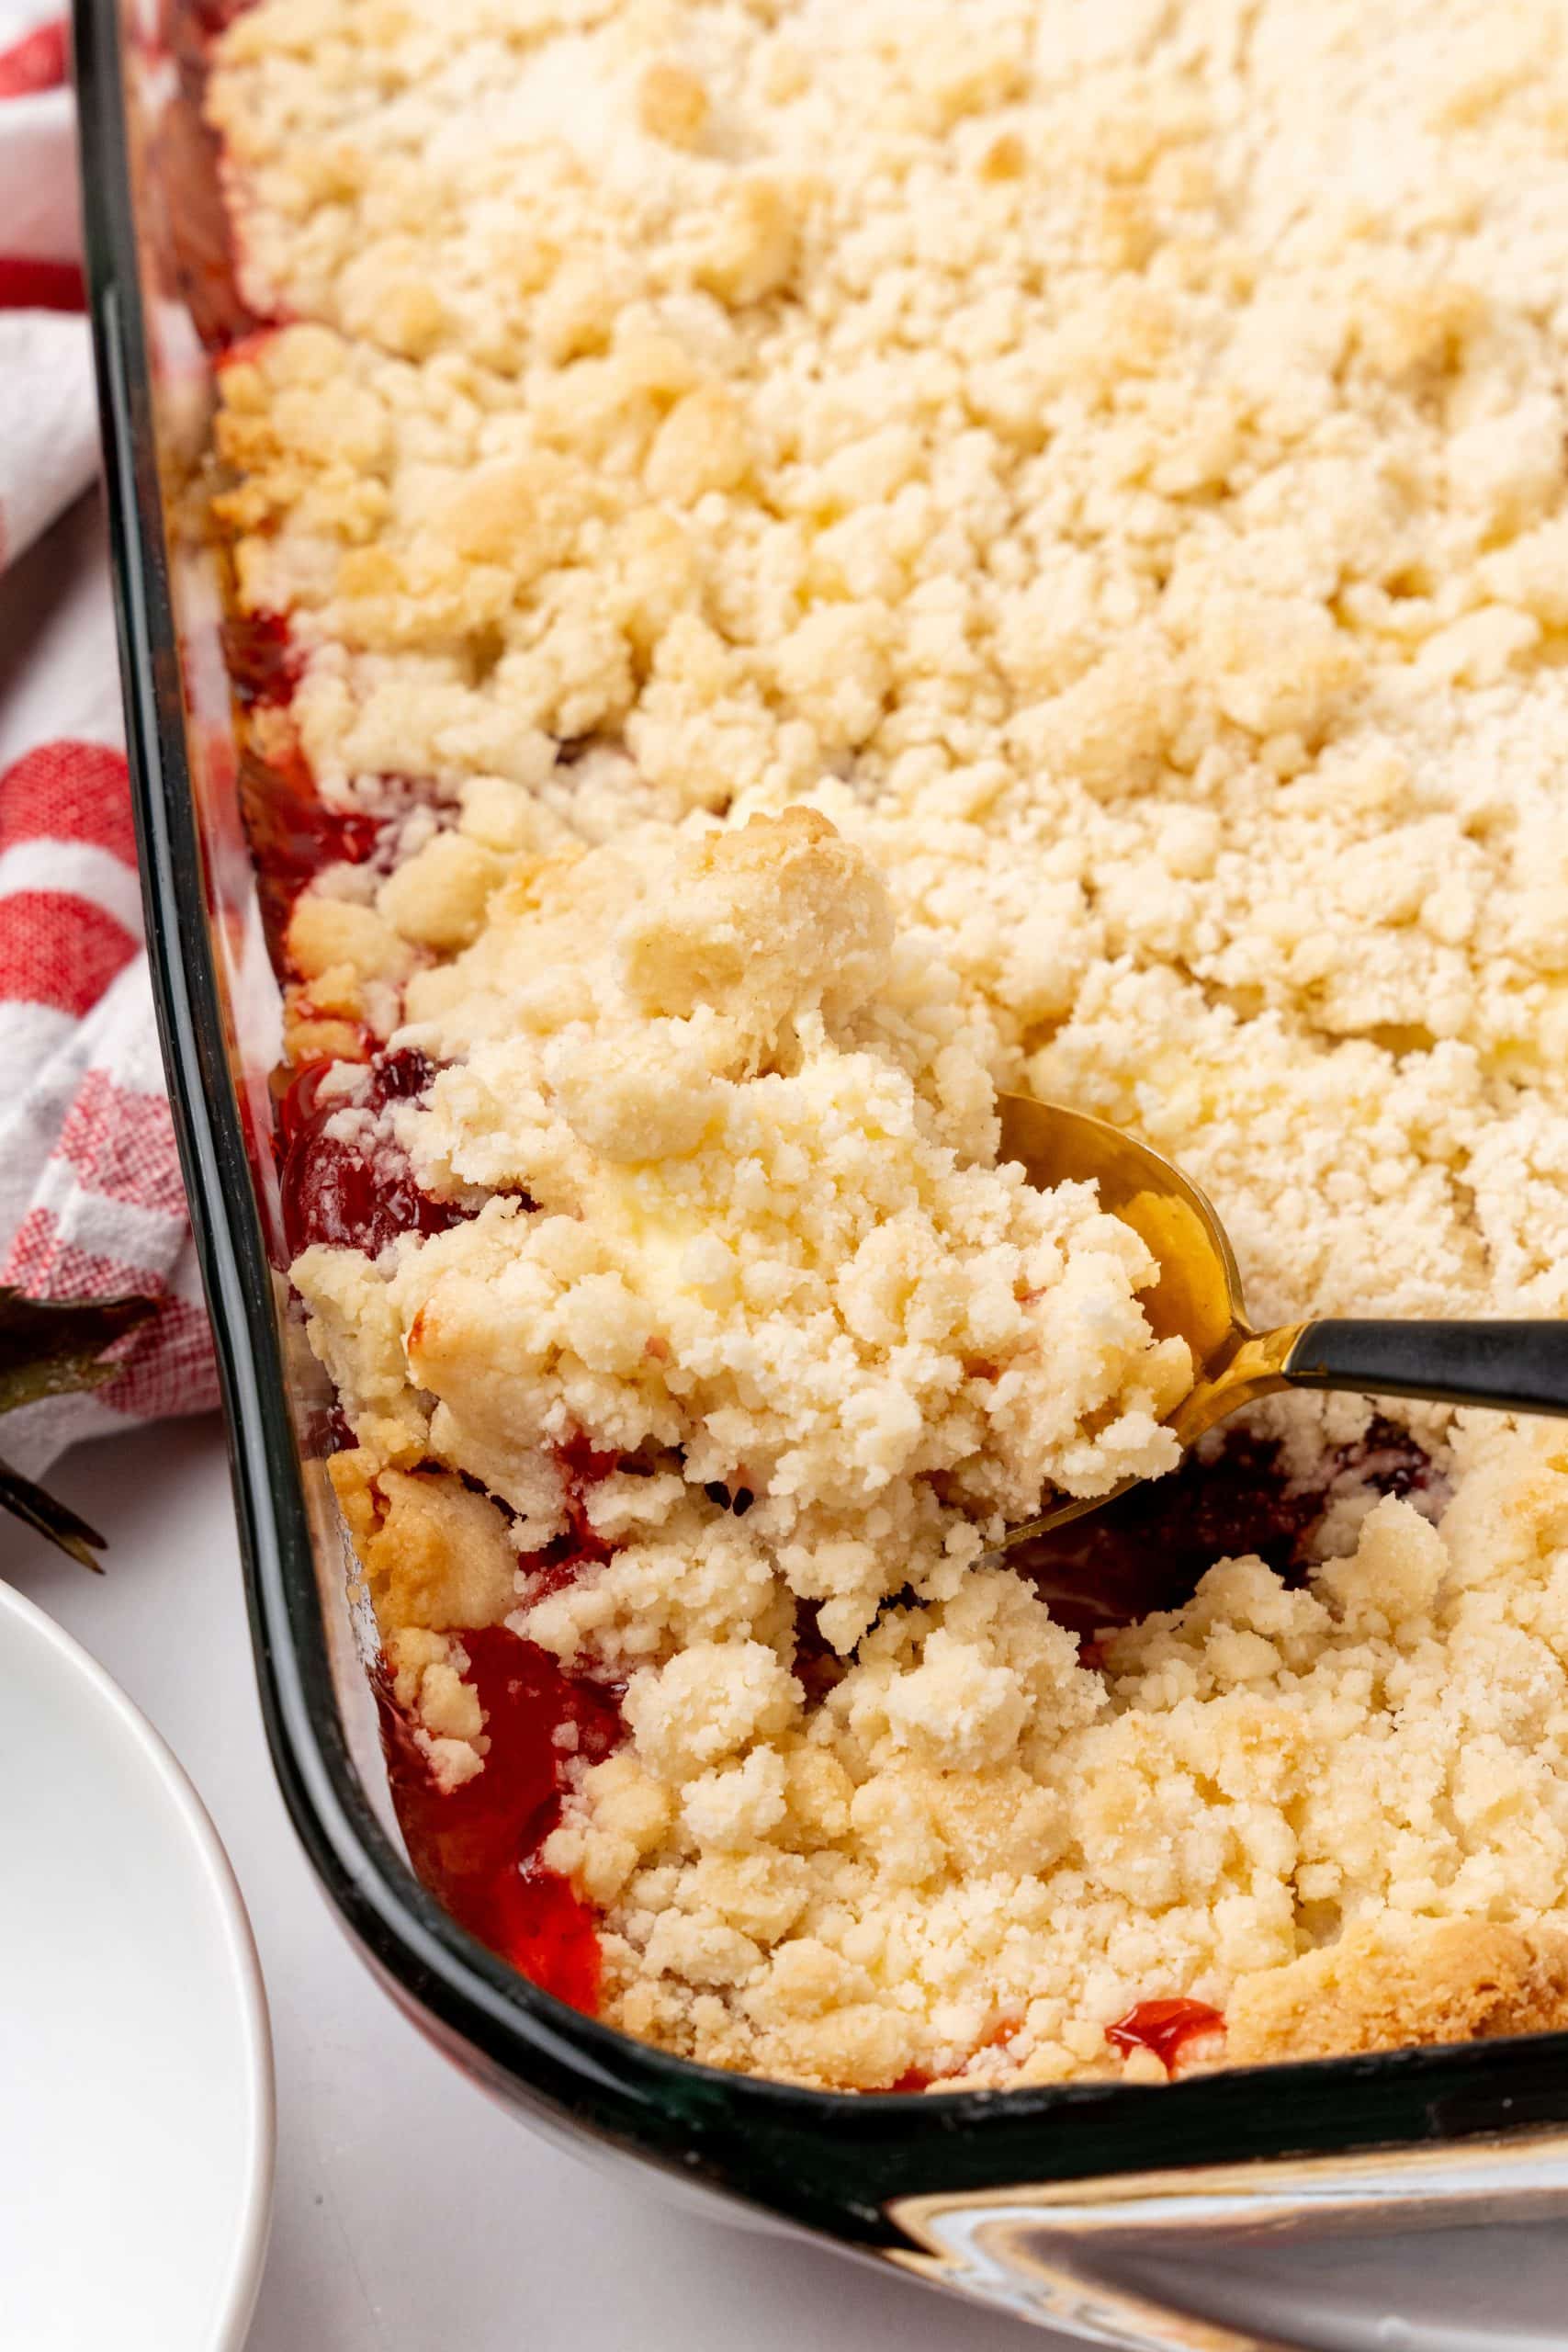 a spoon digging in to a baked strawberry dump cake